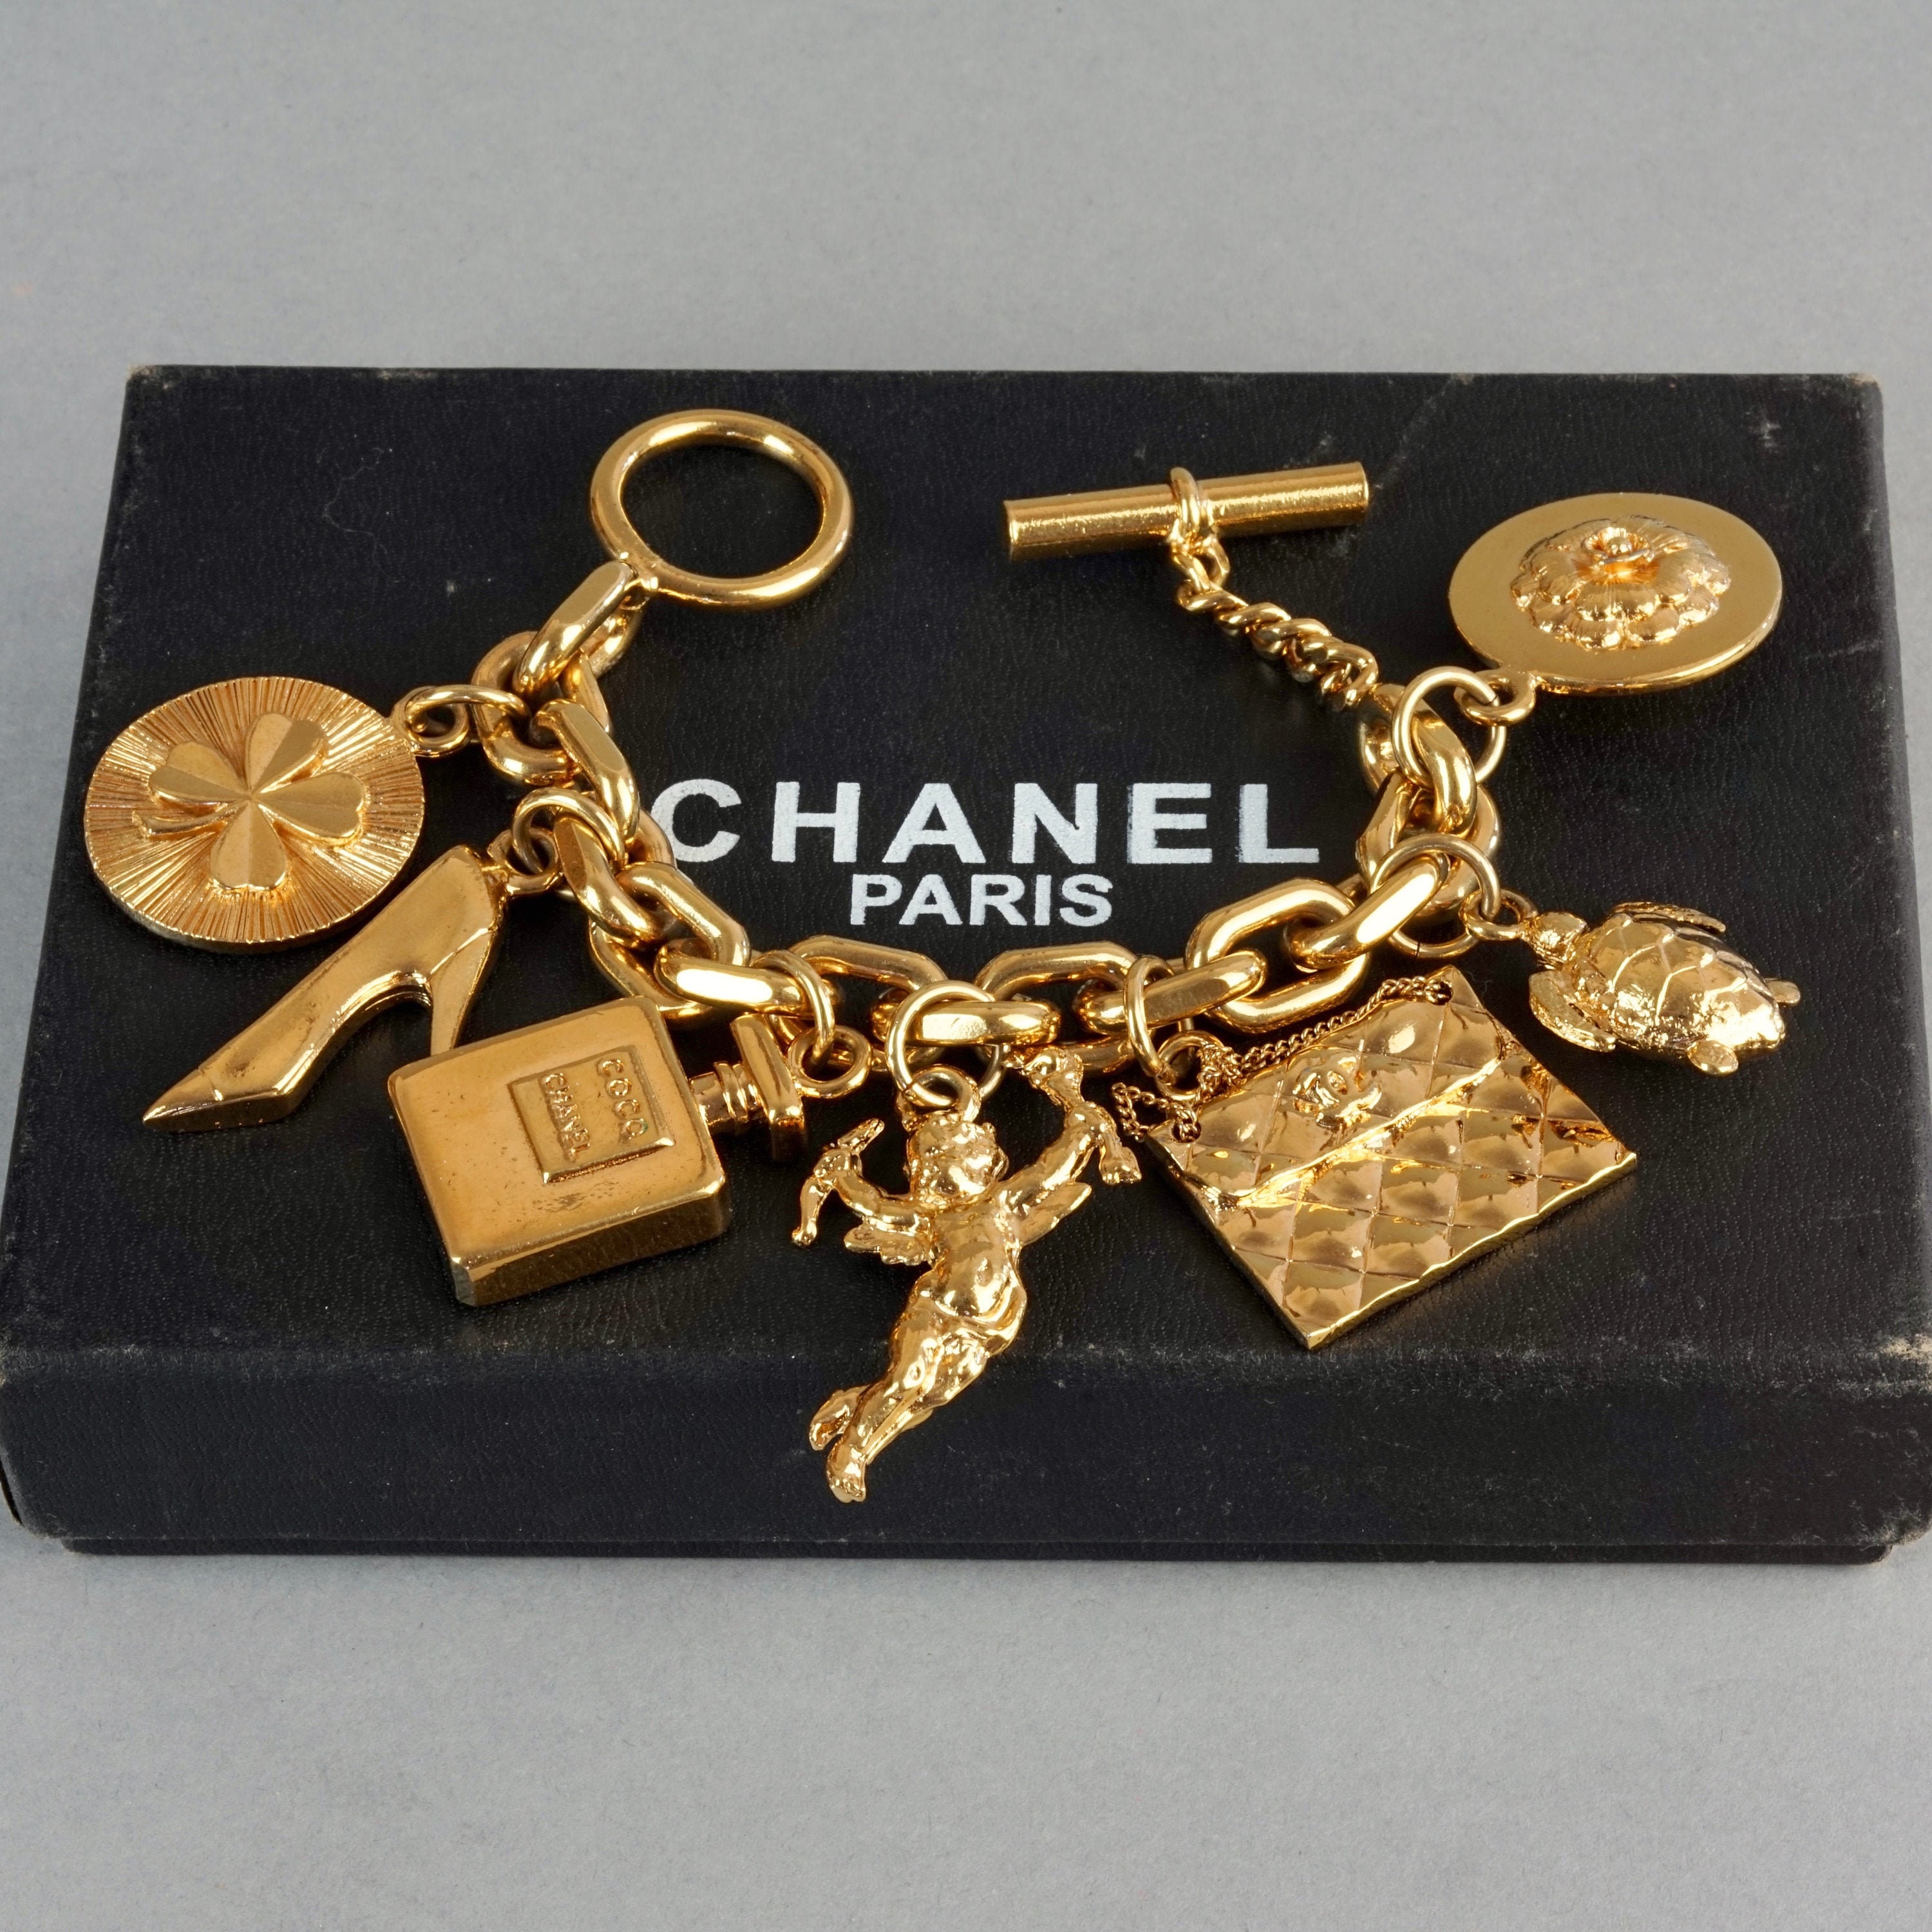 So cute! Cheapest Chanel jewelry out of the complementary Charms from